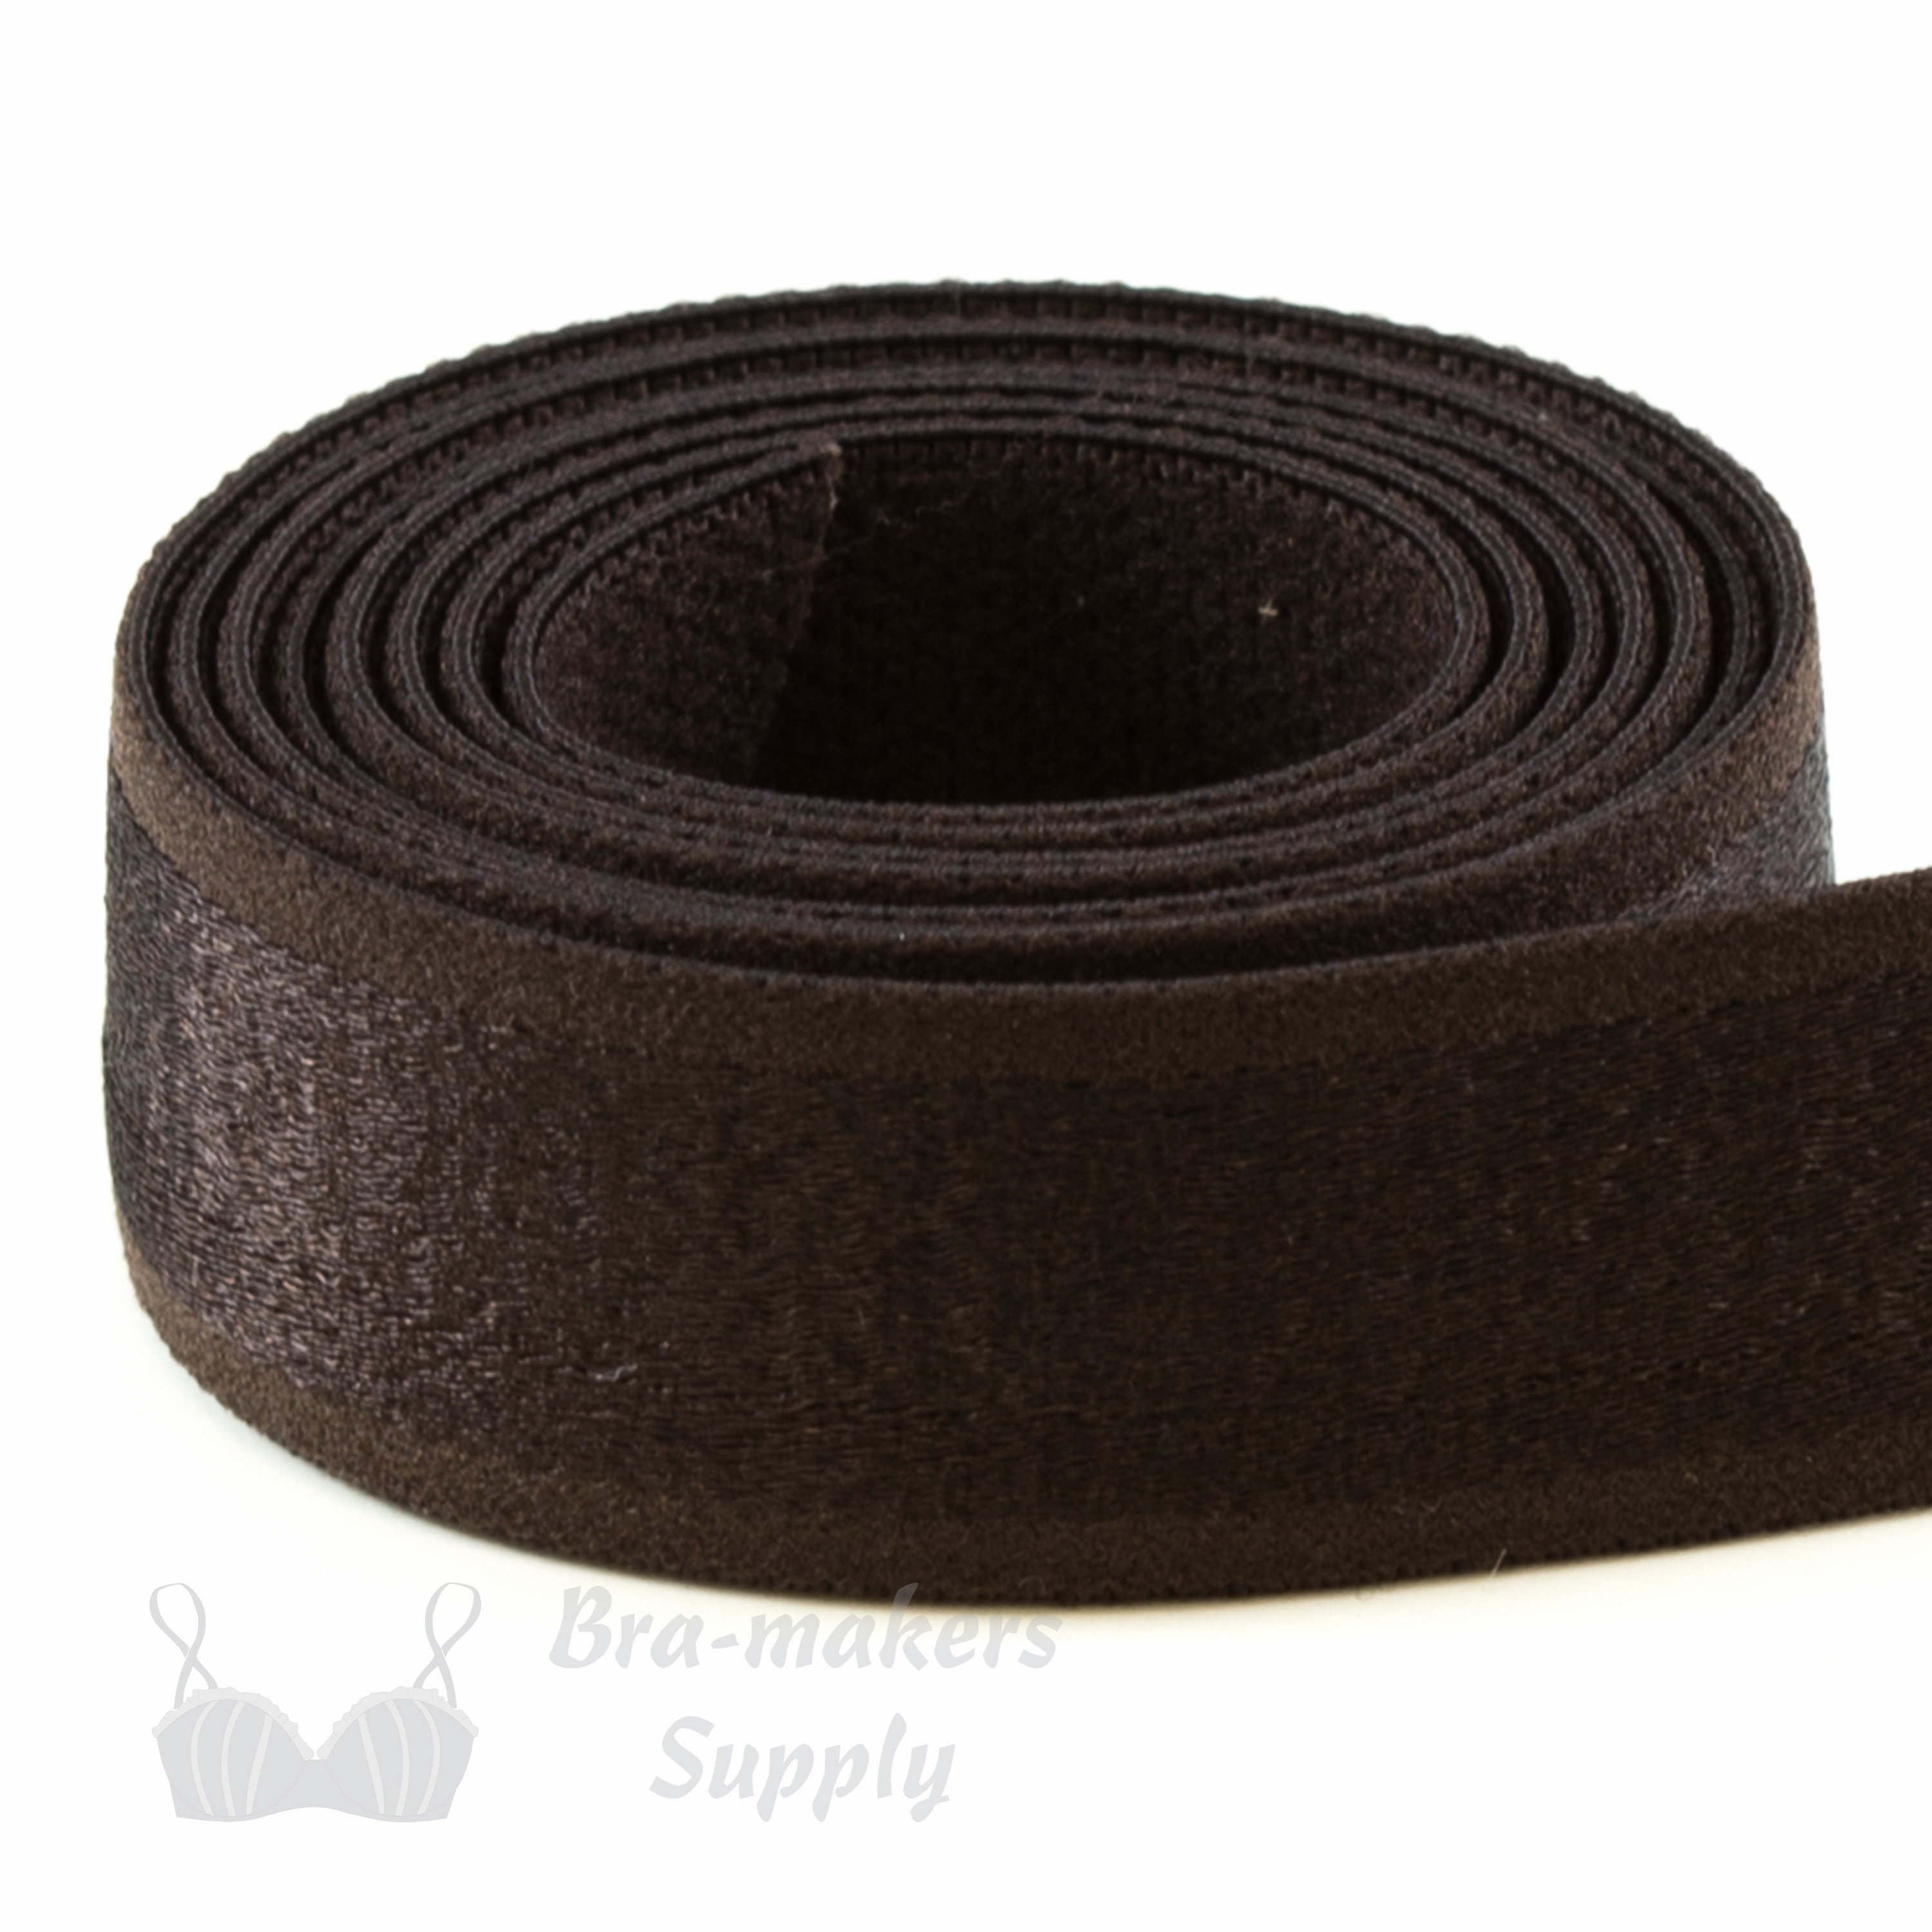 three quarters of an inch satin stripe strap elastic or 18 mm bra strap elastic ES-64 chocolate from Bra-Makers Supply 1 metre roll shown